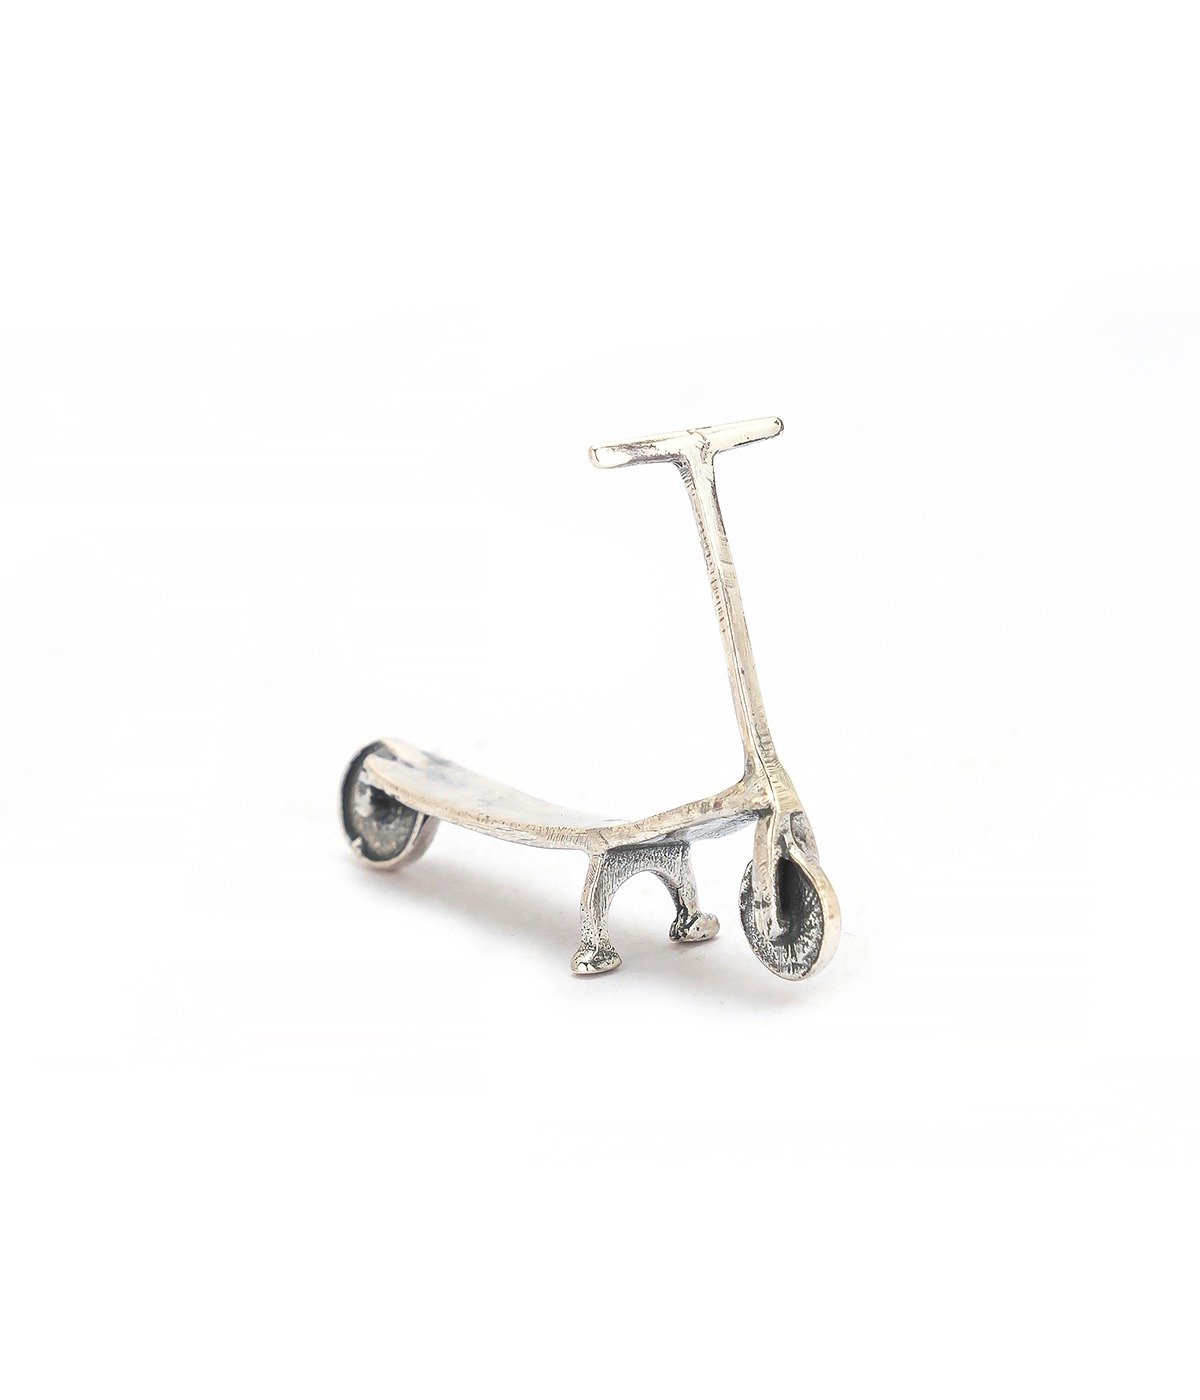 92.5 STERLING SILVER  MINIATURE SCOOTER FOR GIFT